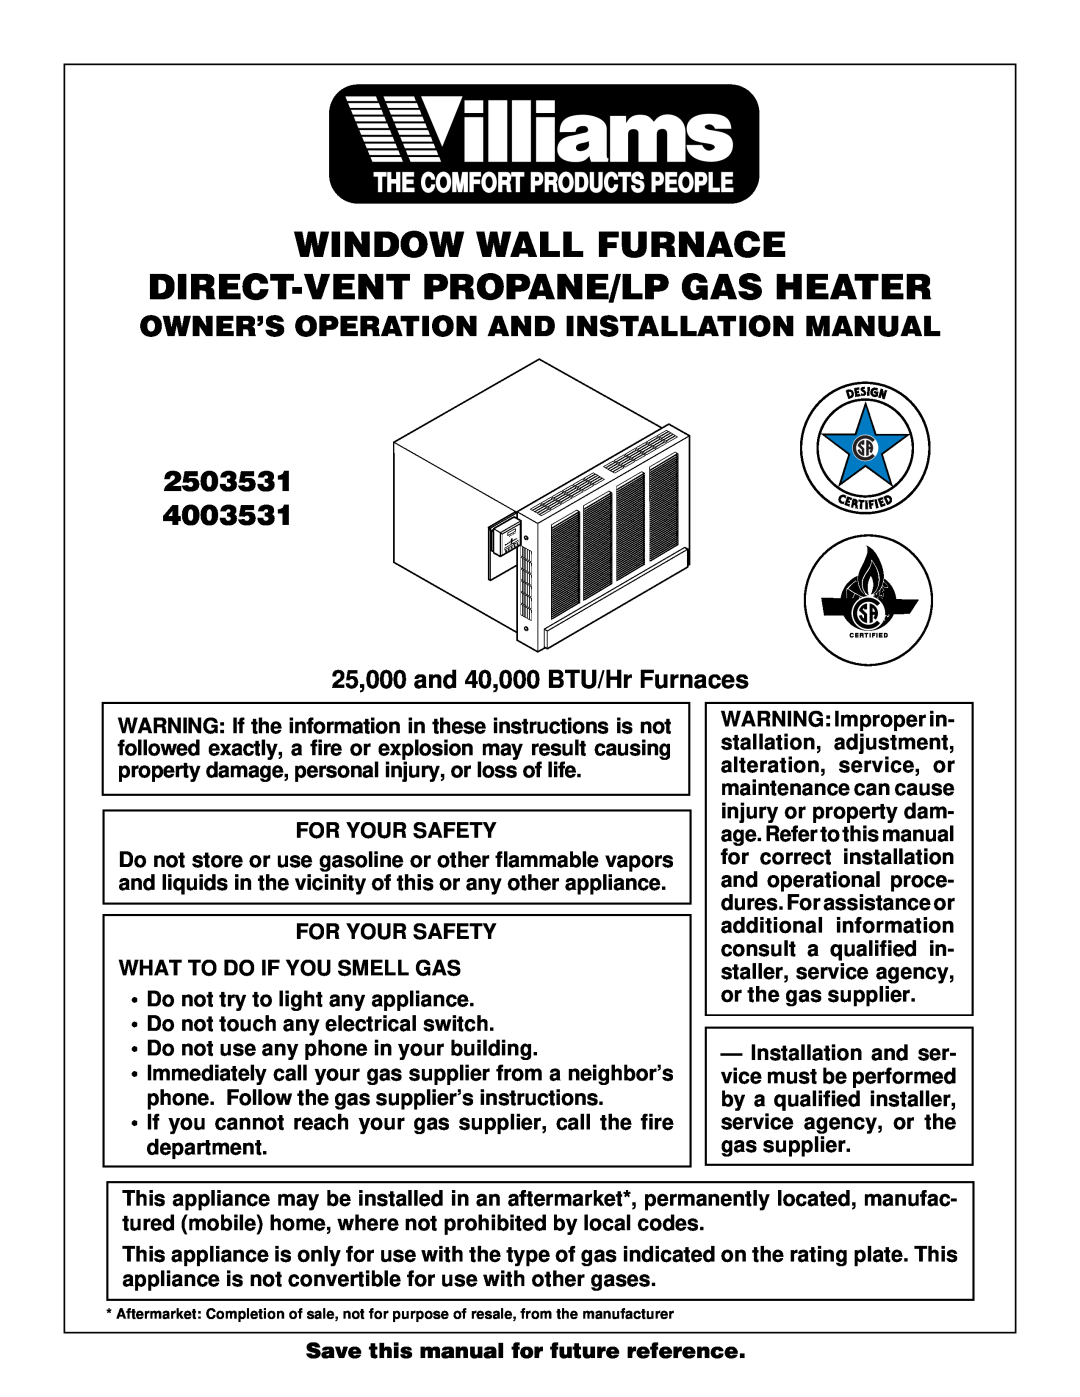 Williams 4003531 installation manual Window Wall Furnace, Direct-Ventpropane/Lp Gas Heater, The Comfort Products People 